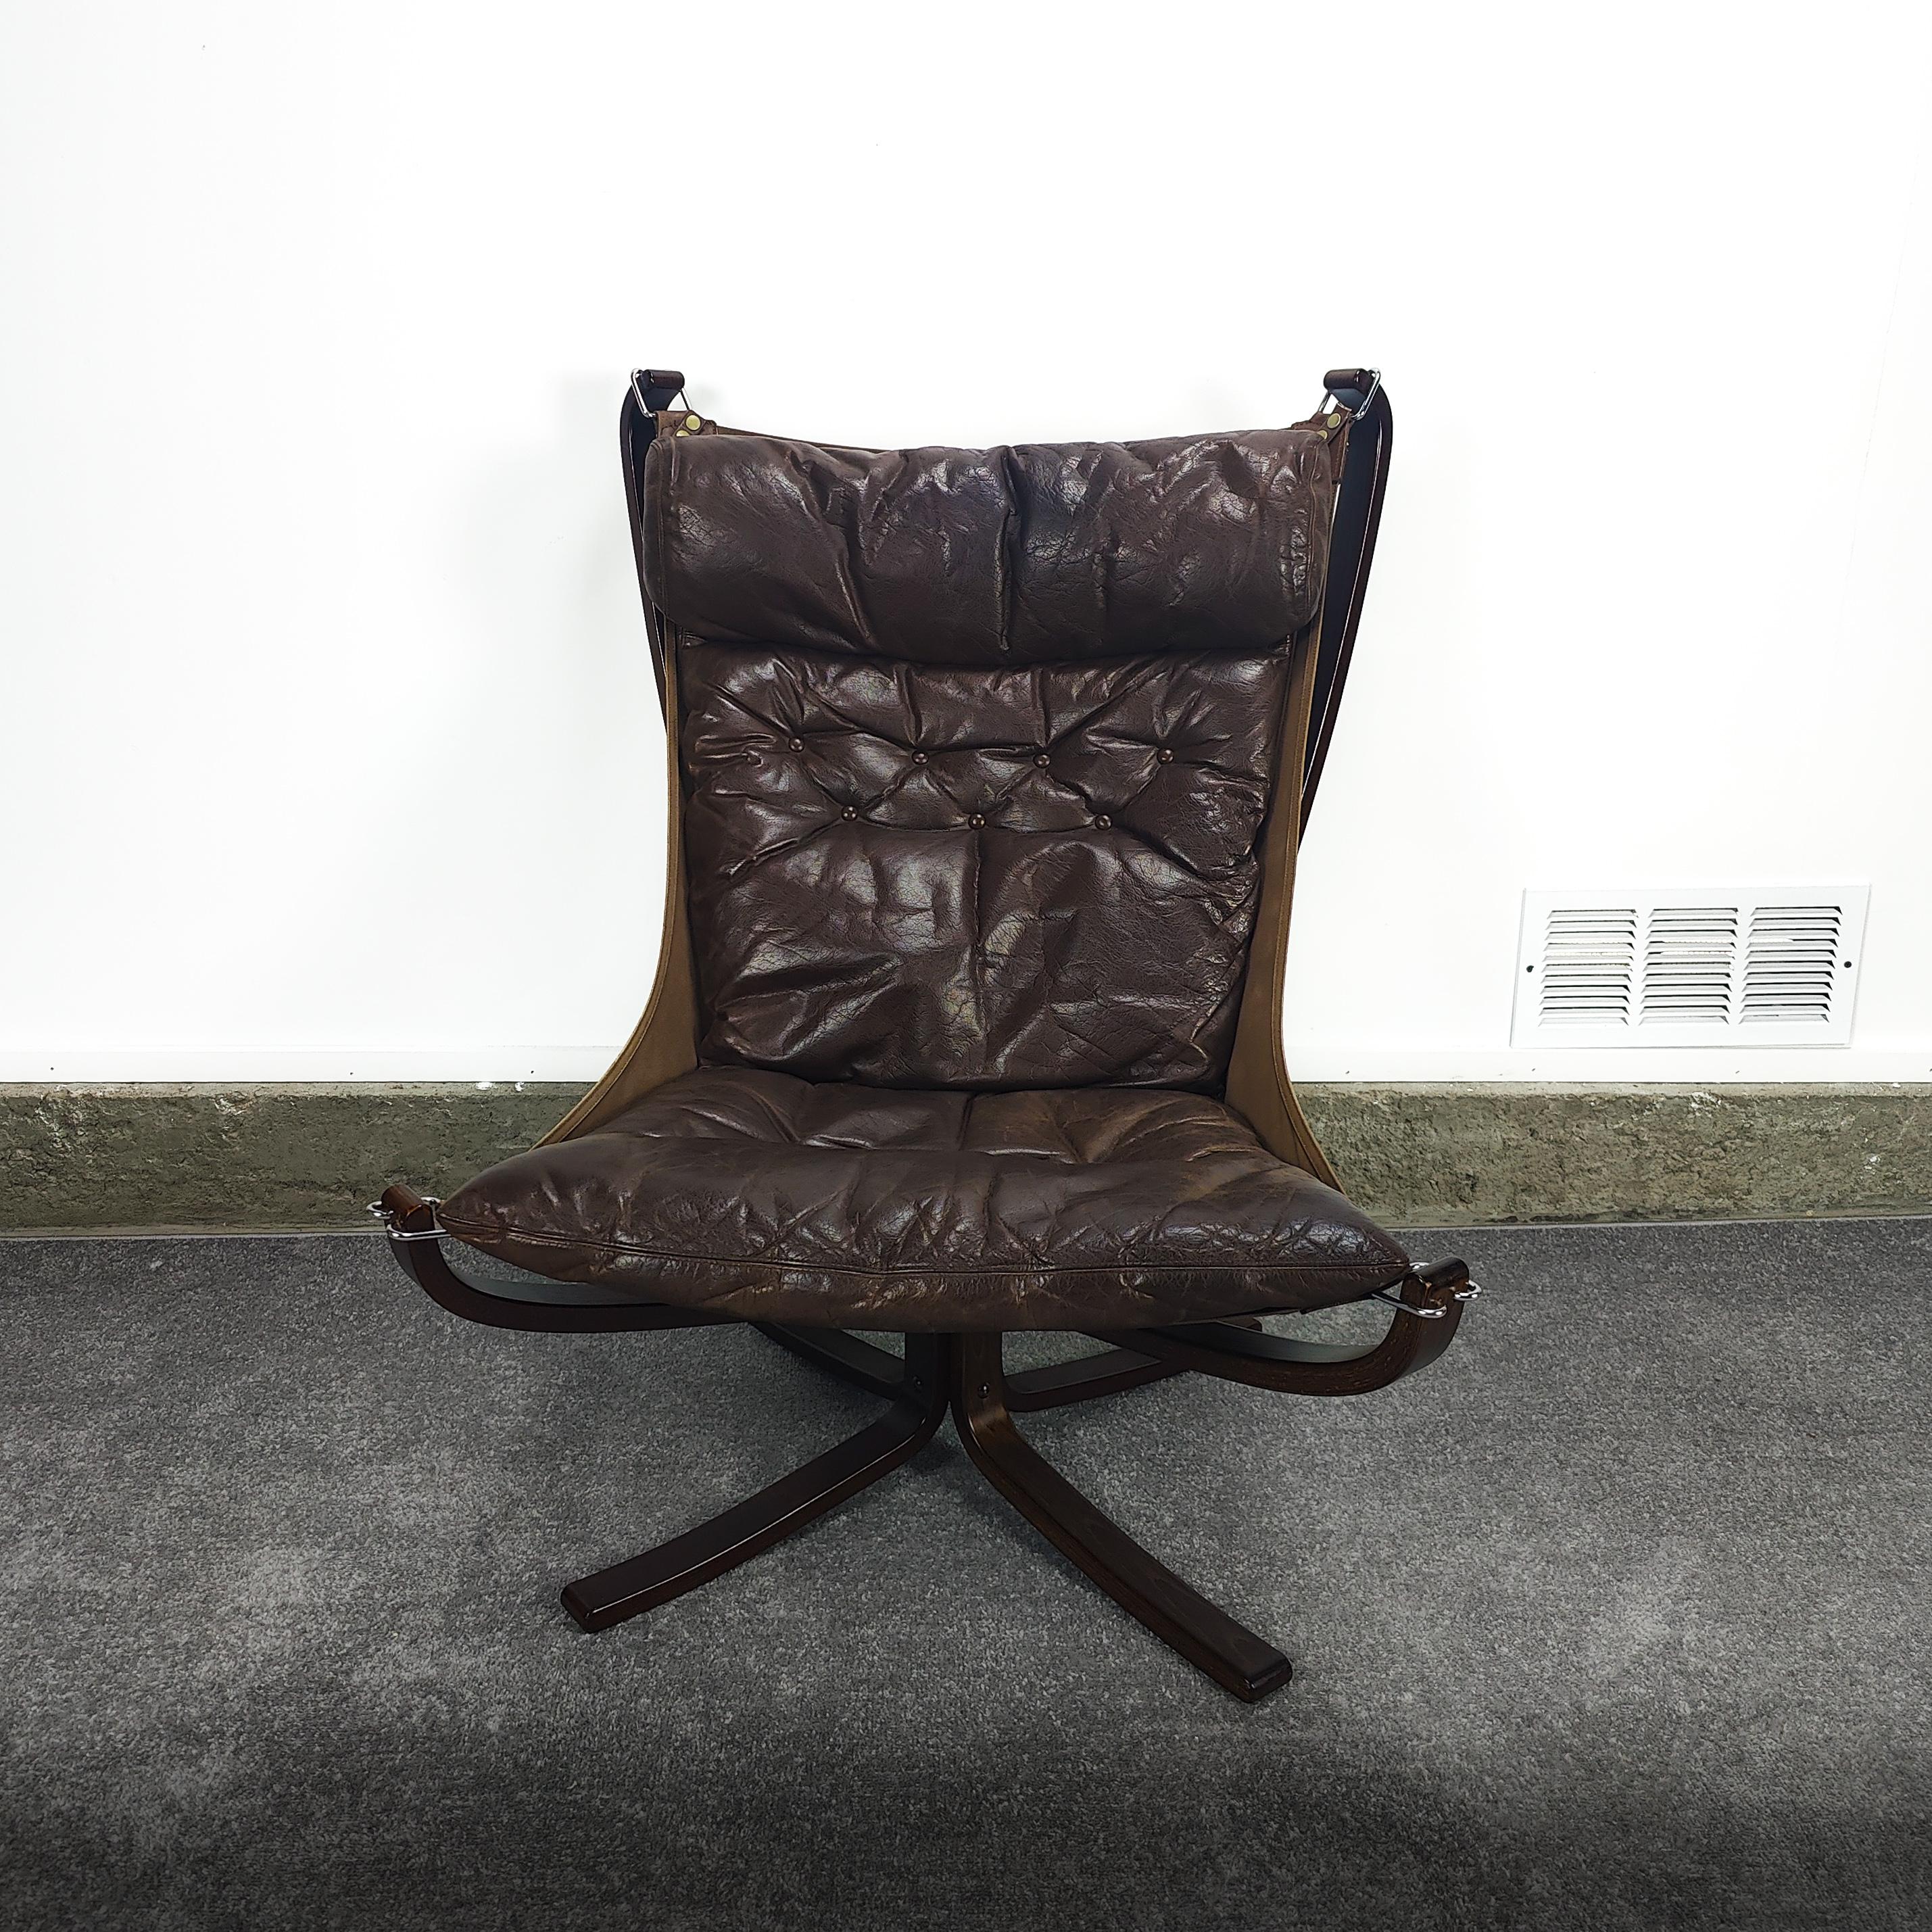 Falcon chair by Sigurd Ressell for Vatne Mobler, circa 1970s. Per original owner, this chair was kept in storage for the past 25 years. Leather is in excellent condition with the exception of two buttons missing in the seat cushion. Beautiful patina